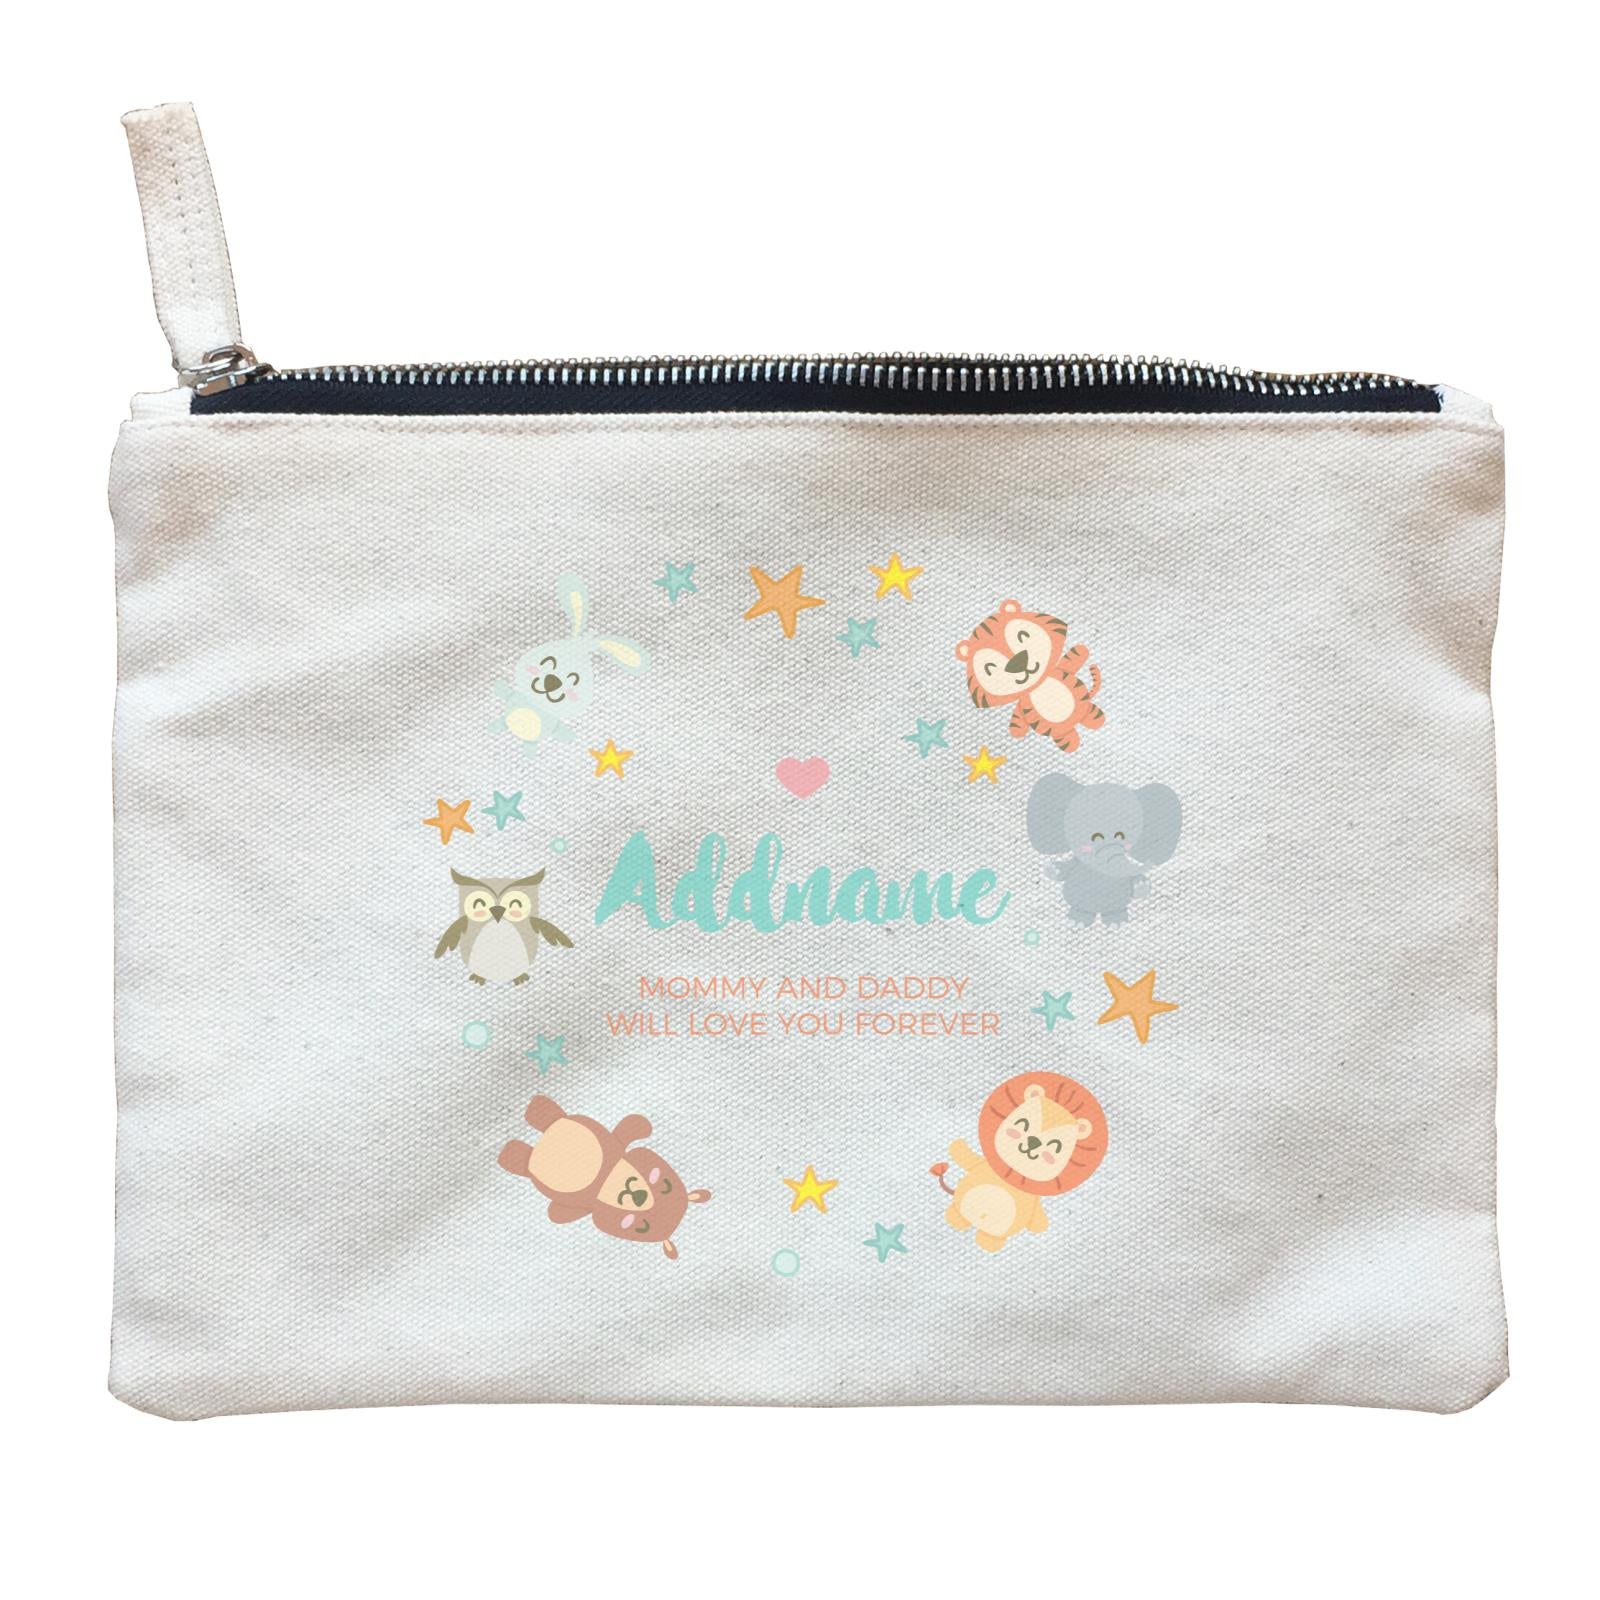 Cute Safari Animals with Stars Element Personalizable with Name and Text Zipper Pouch